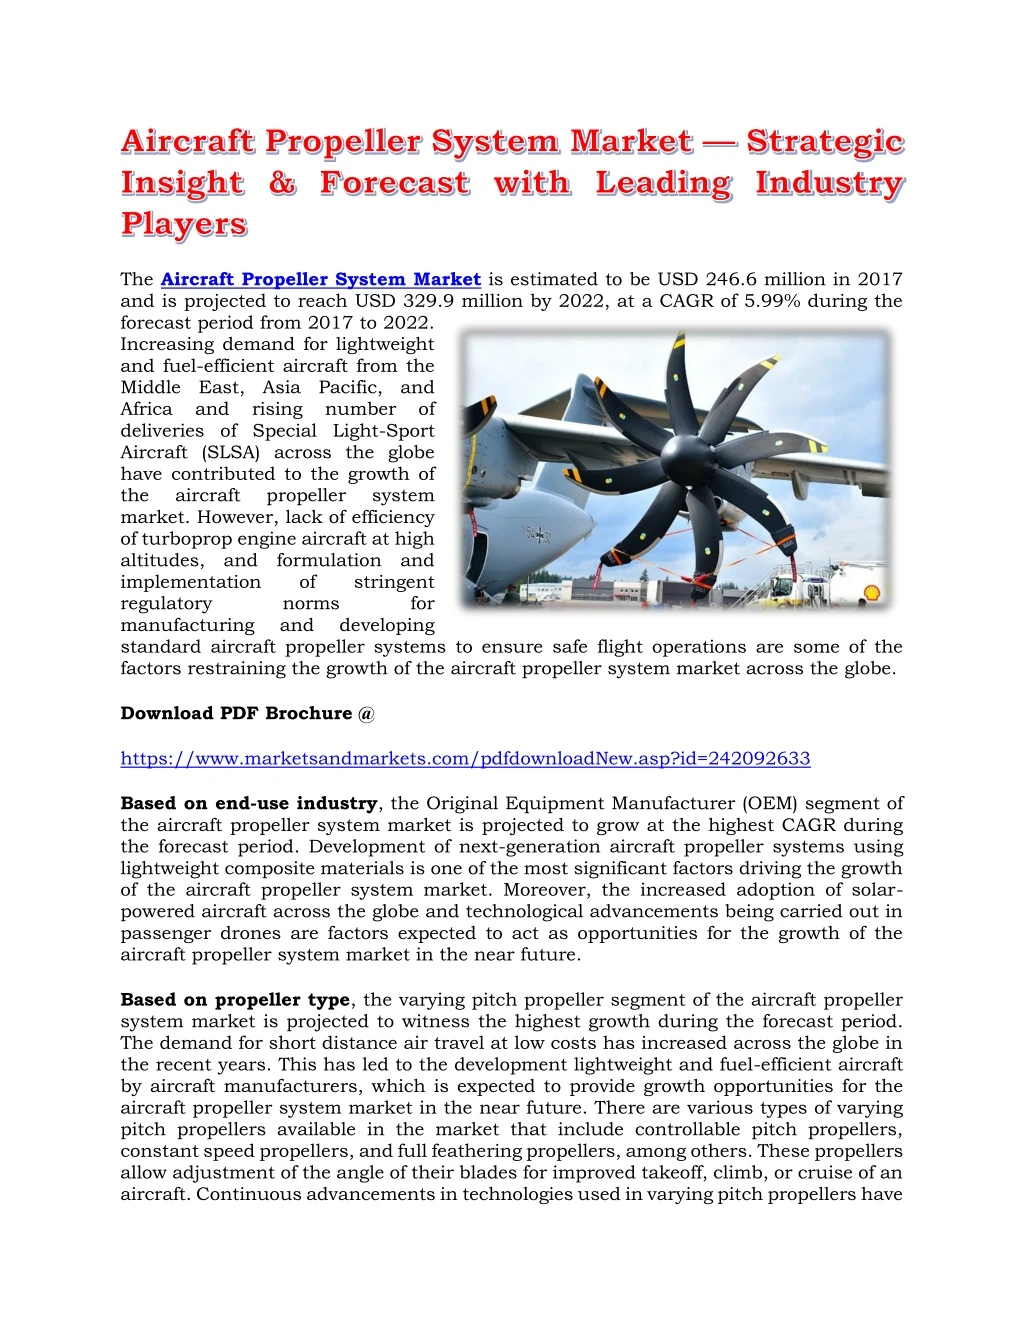 the aircraft propeller system market is estimated